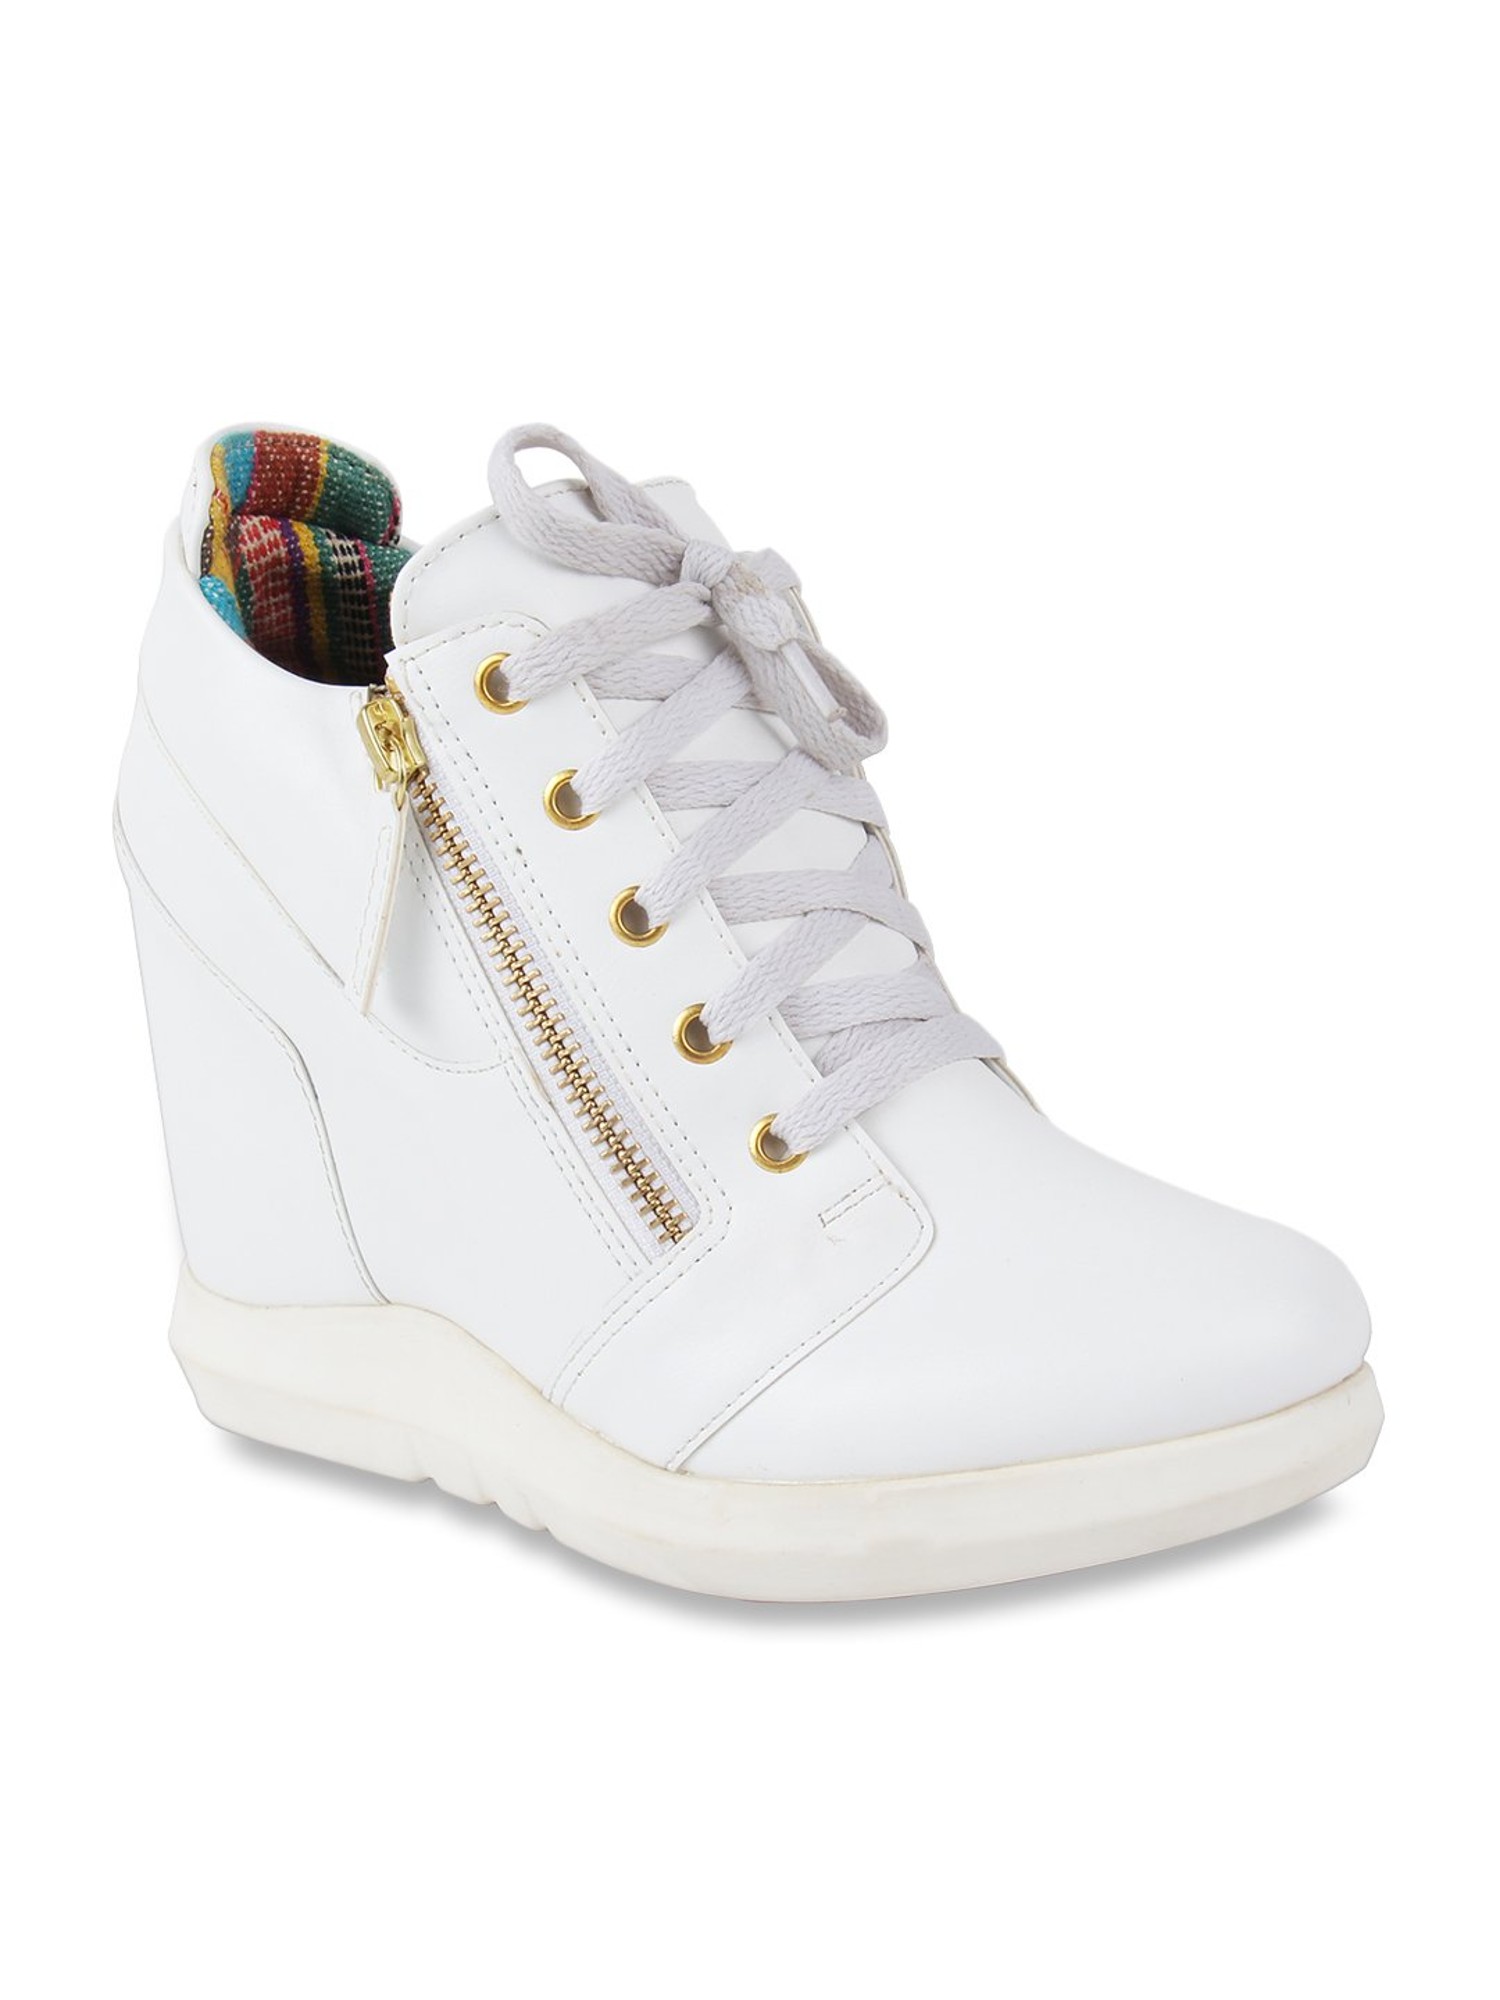 Sassy Crawley Wedge Sneakers | Black Croc – Twisted Label Boutique